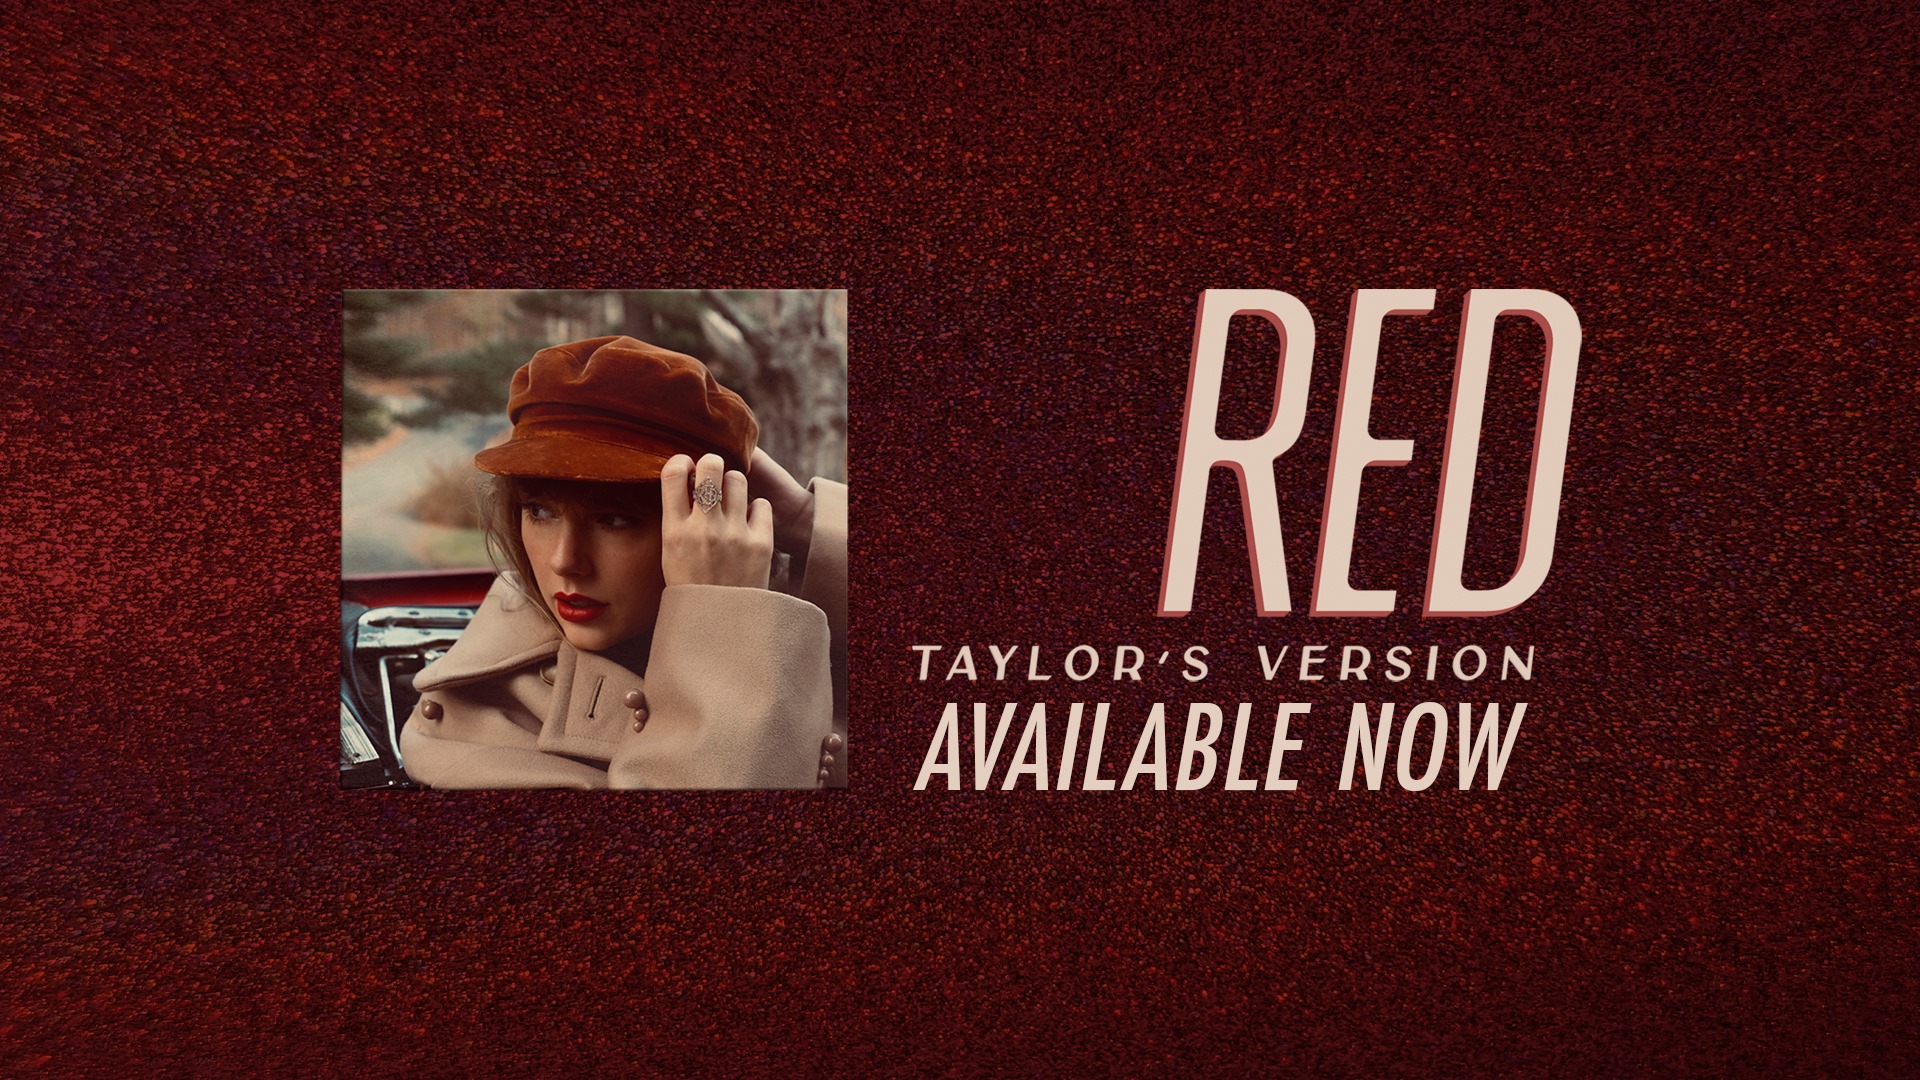 A promo poster of Taylor Swift wearing a train driver's cap, red lipstick and a ring that says "red". 